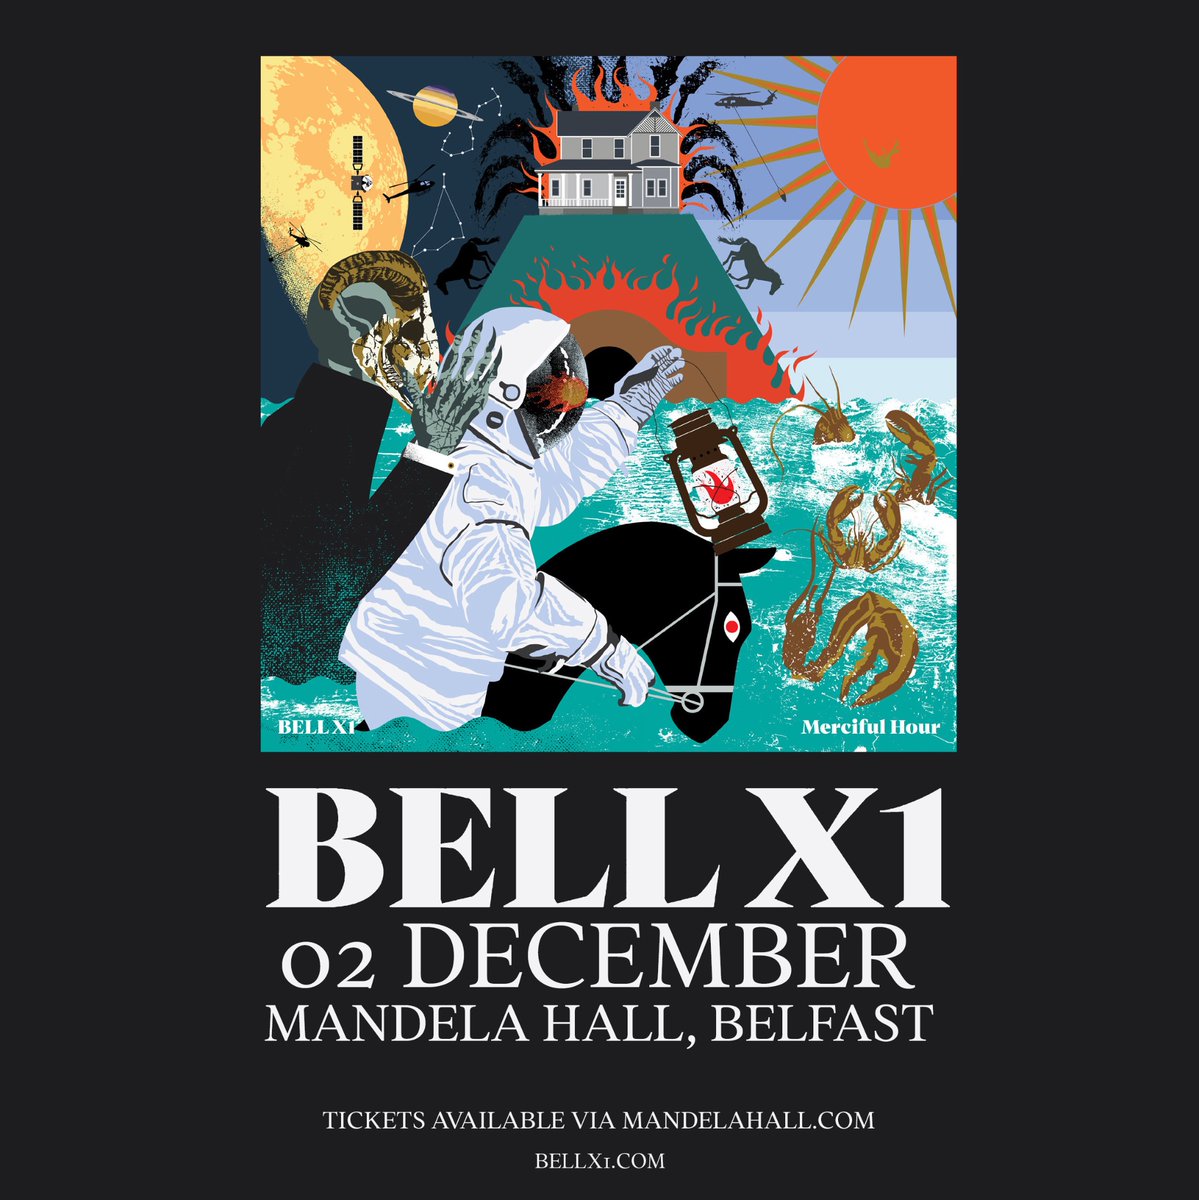 This Saturday! @BellX1 kickstart a month of all-Irish live acts in Mandela hall. Remaining tickets available from Mandelahall.com